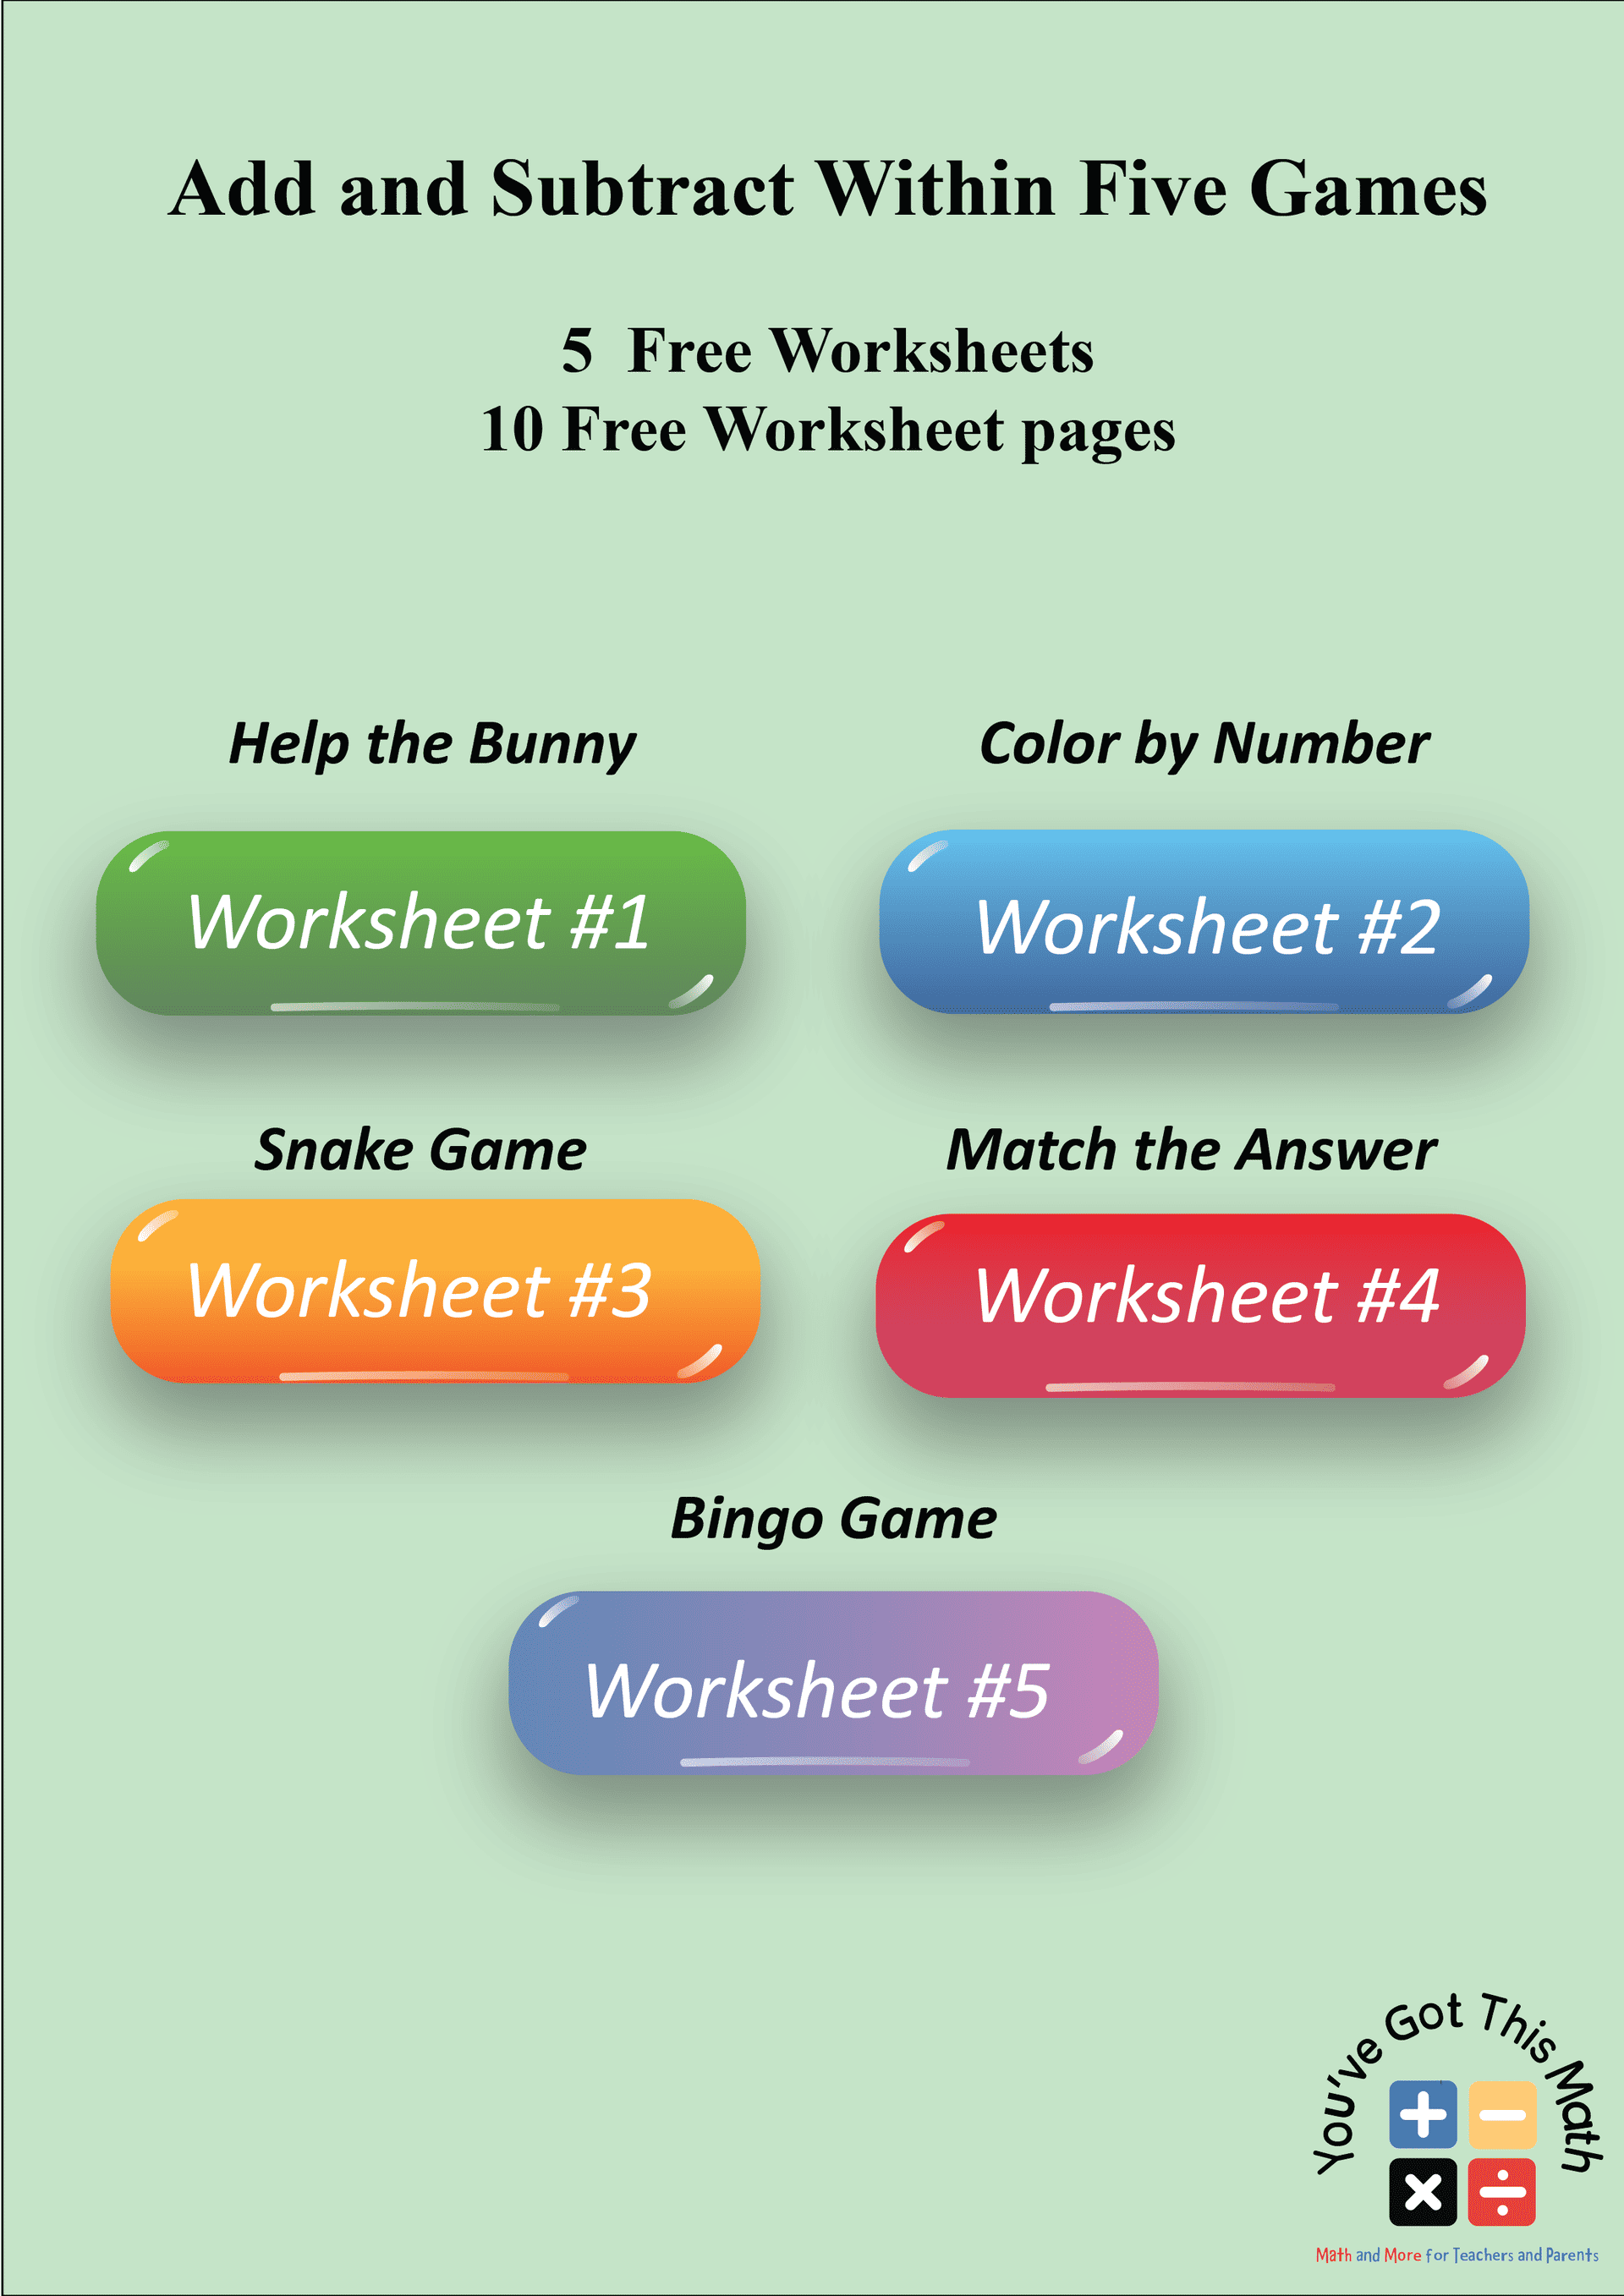 Add and Subtract Within Five Games | Free Printables